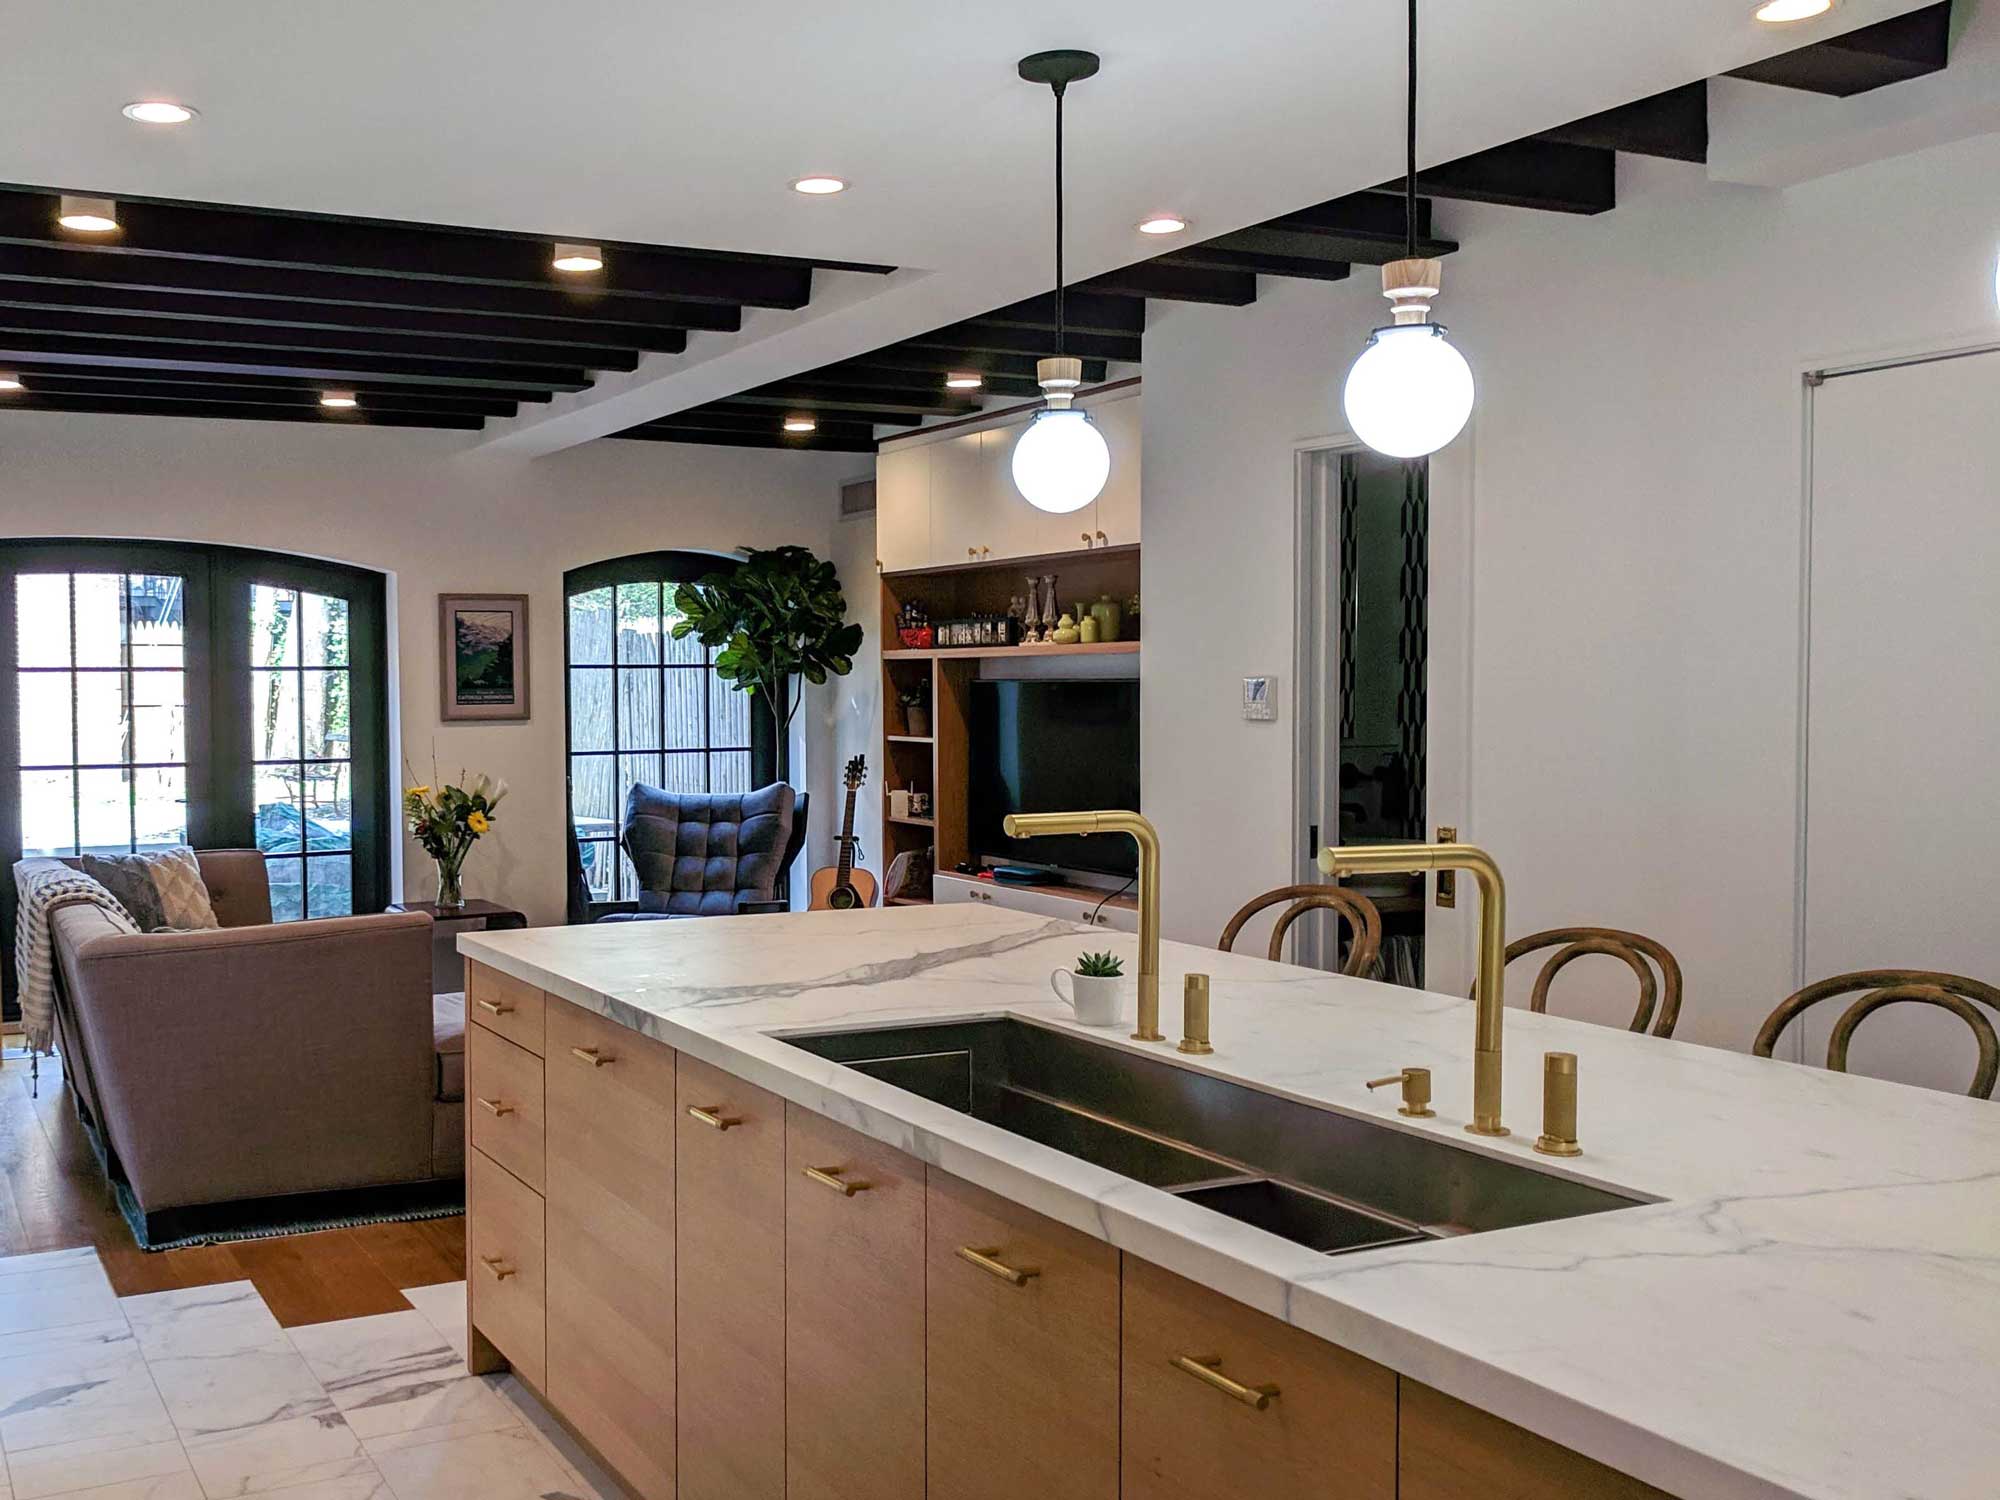 Kitchen Island with sink and pendant lighting